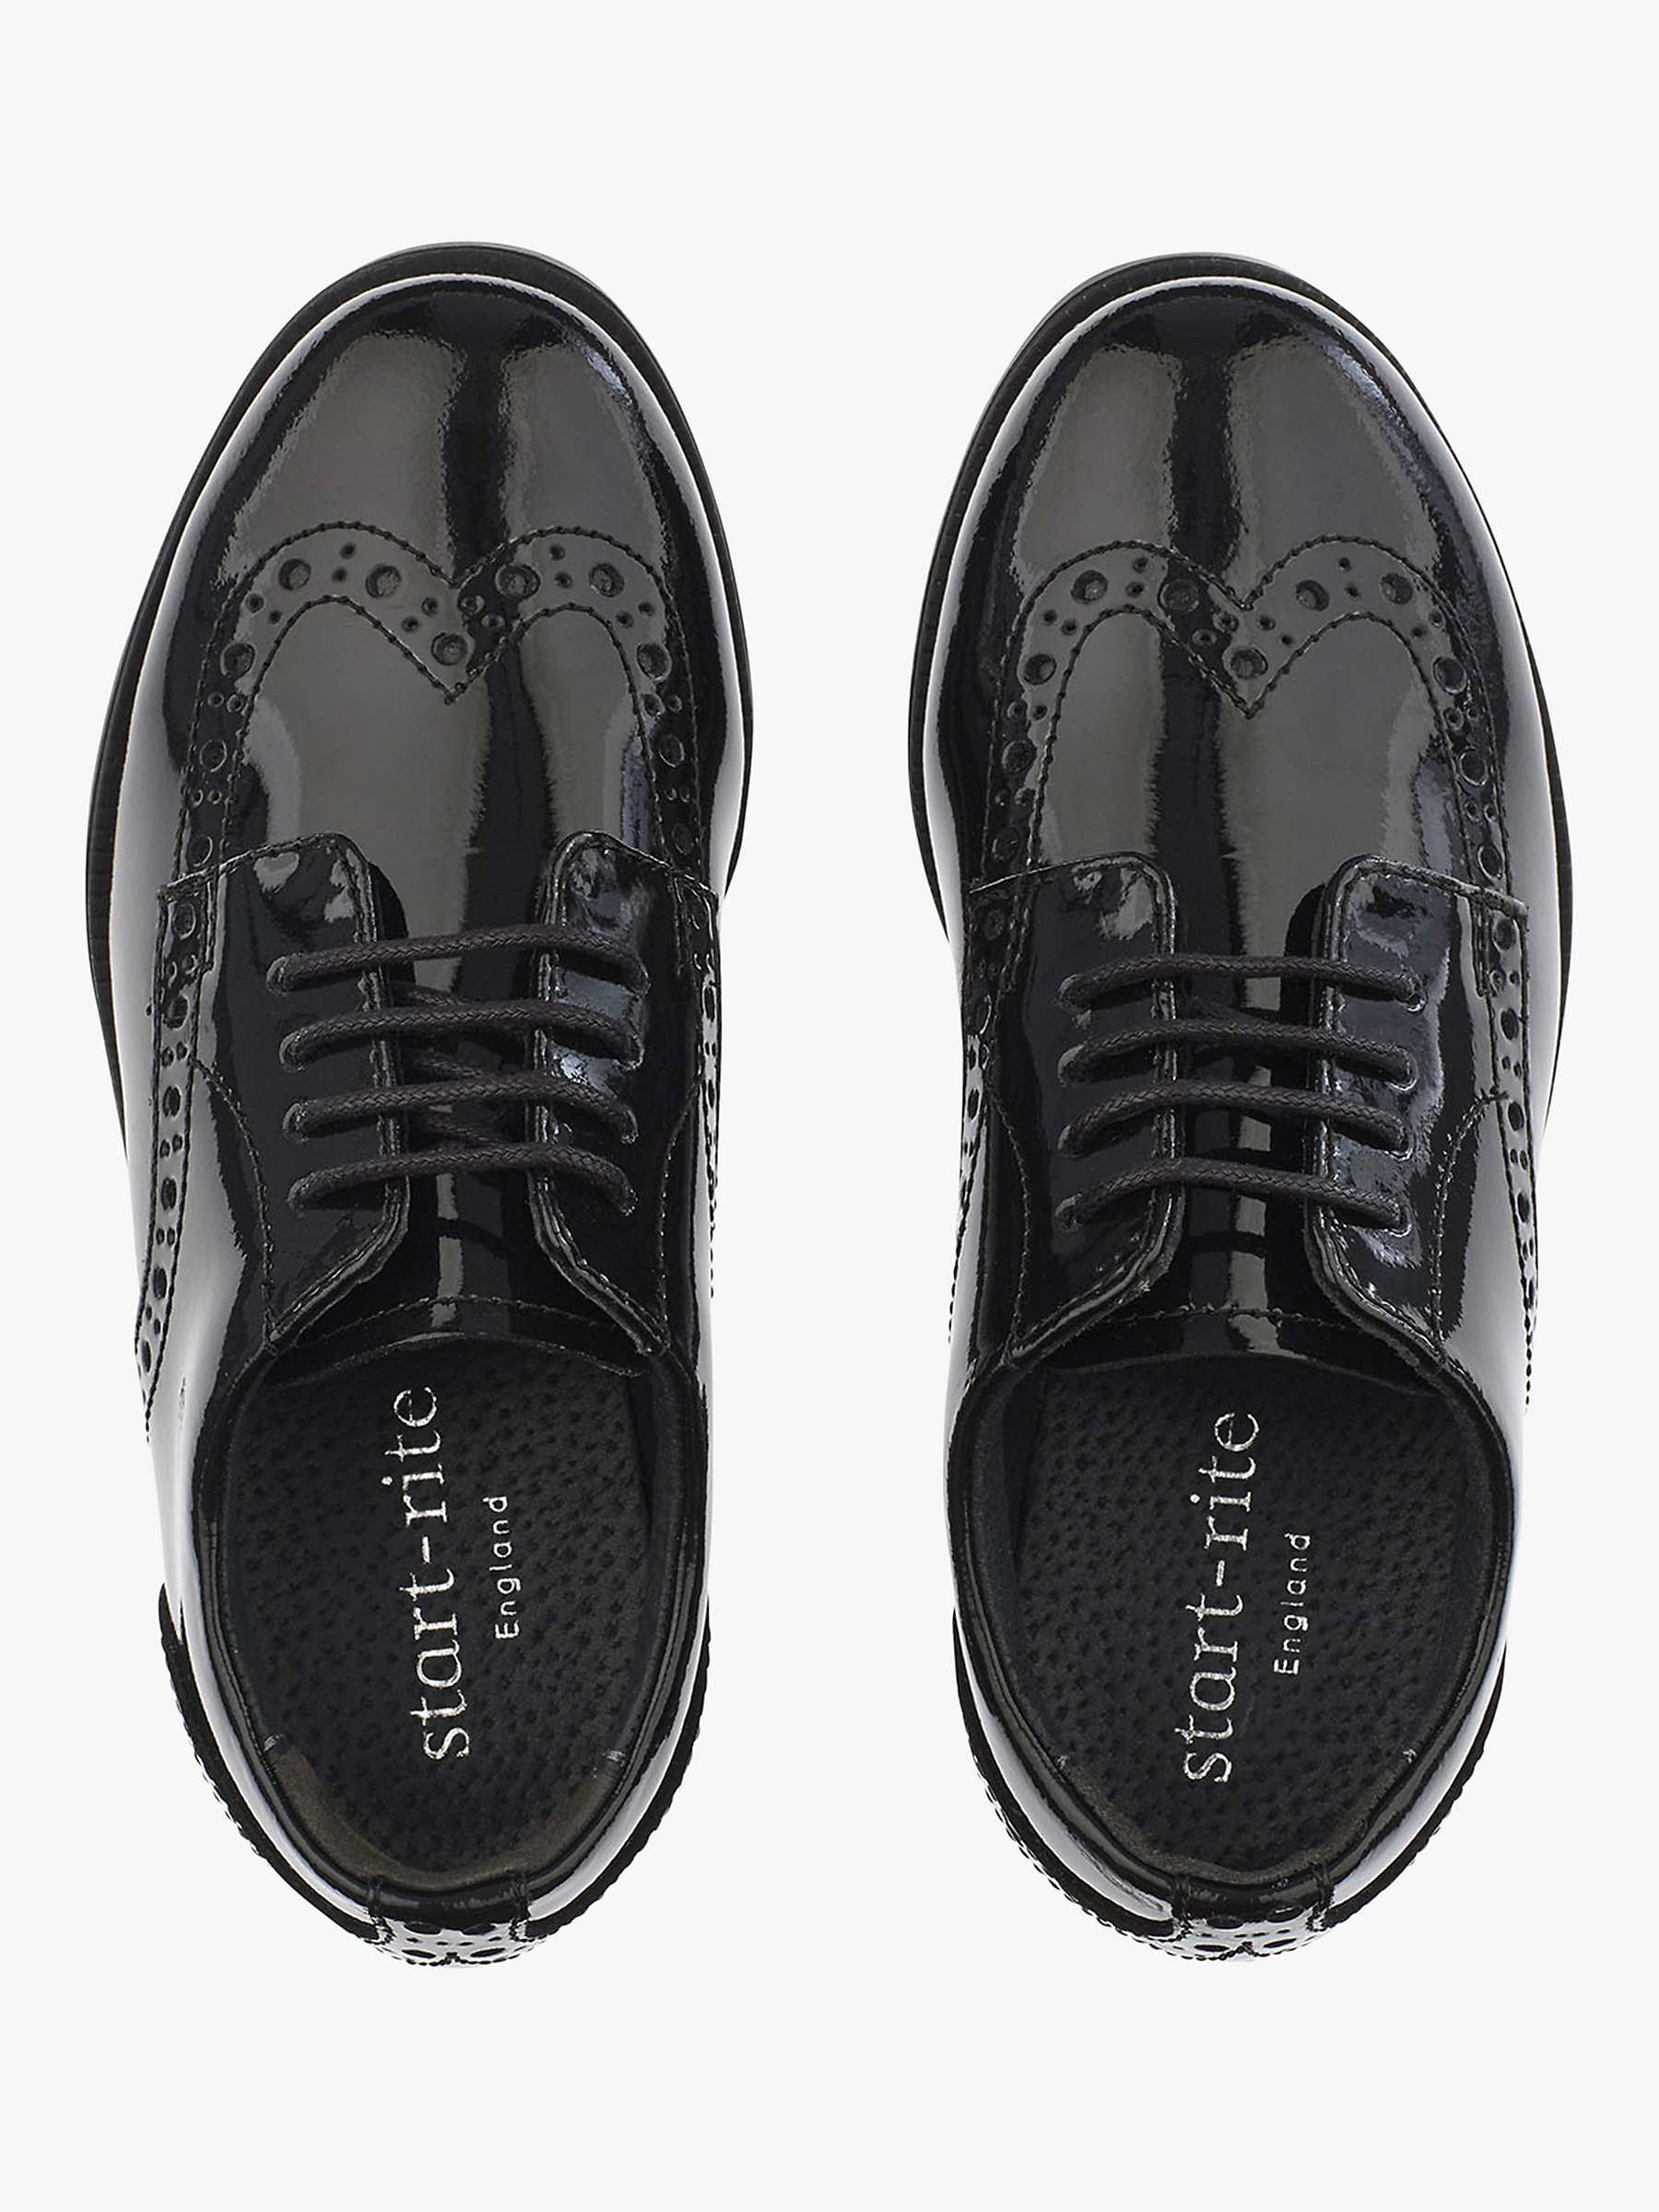 Buy Start-Rite Kids' Leather Brogue Shoes, Black Patent Online at johnlewis.com